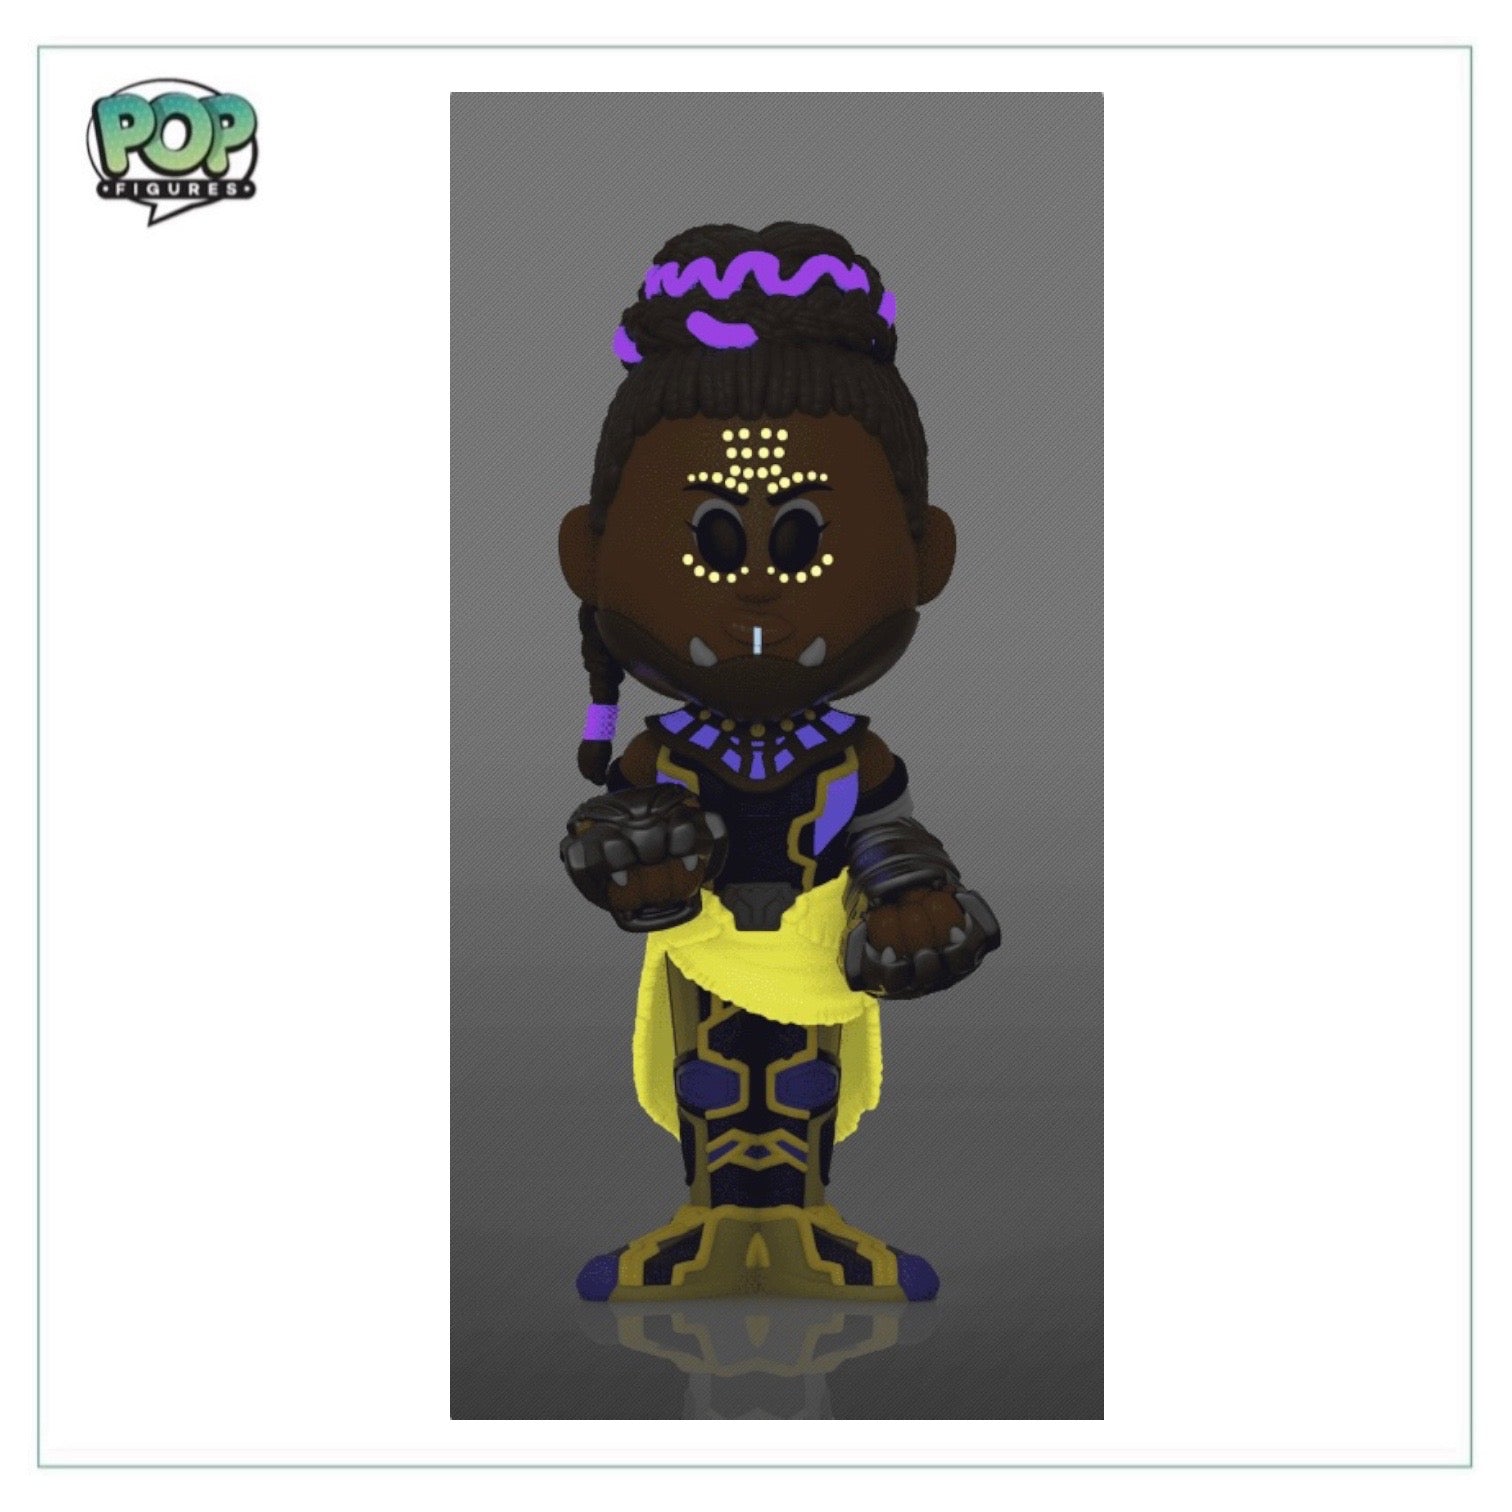 Shuri Funko Soda Vinyl Figure! - Black Panther - International NYCC 2022 Shared Exclusive LE12500 Pcs - Chance of Chase